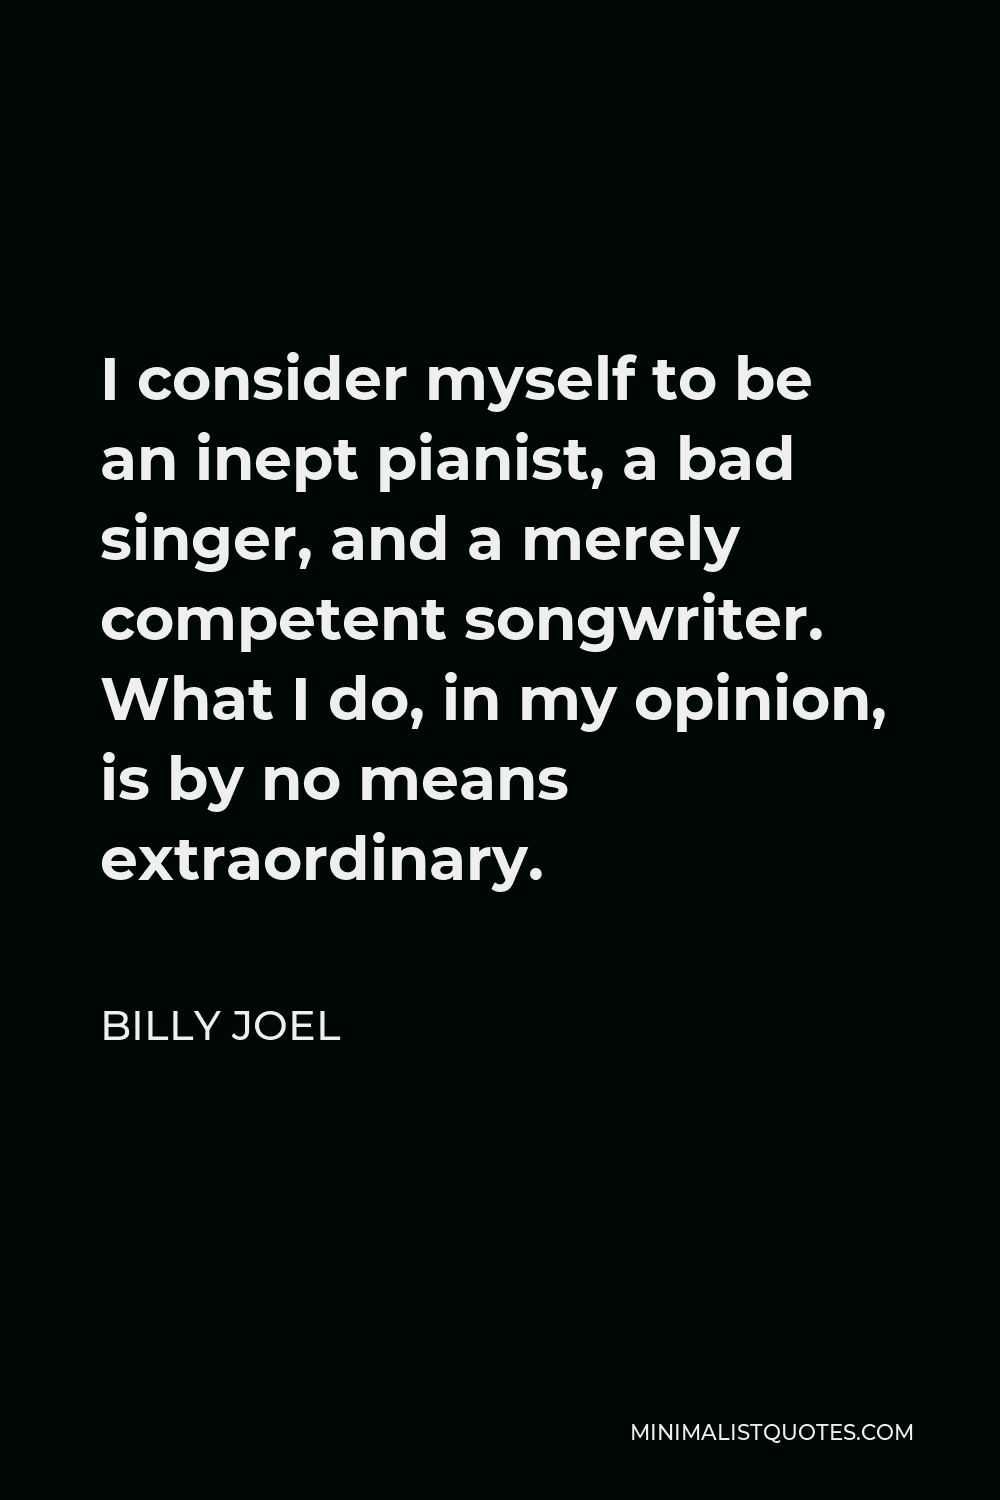 Billy Joel Quote - I consider myself to be an inept pianist, a bad singer, and a merely competent songwriter. What I do, in my opinion, is by no means extraordinary.